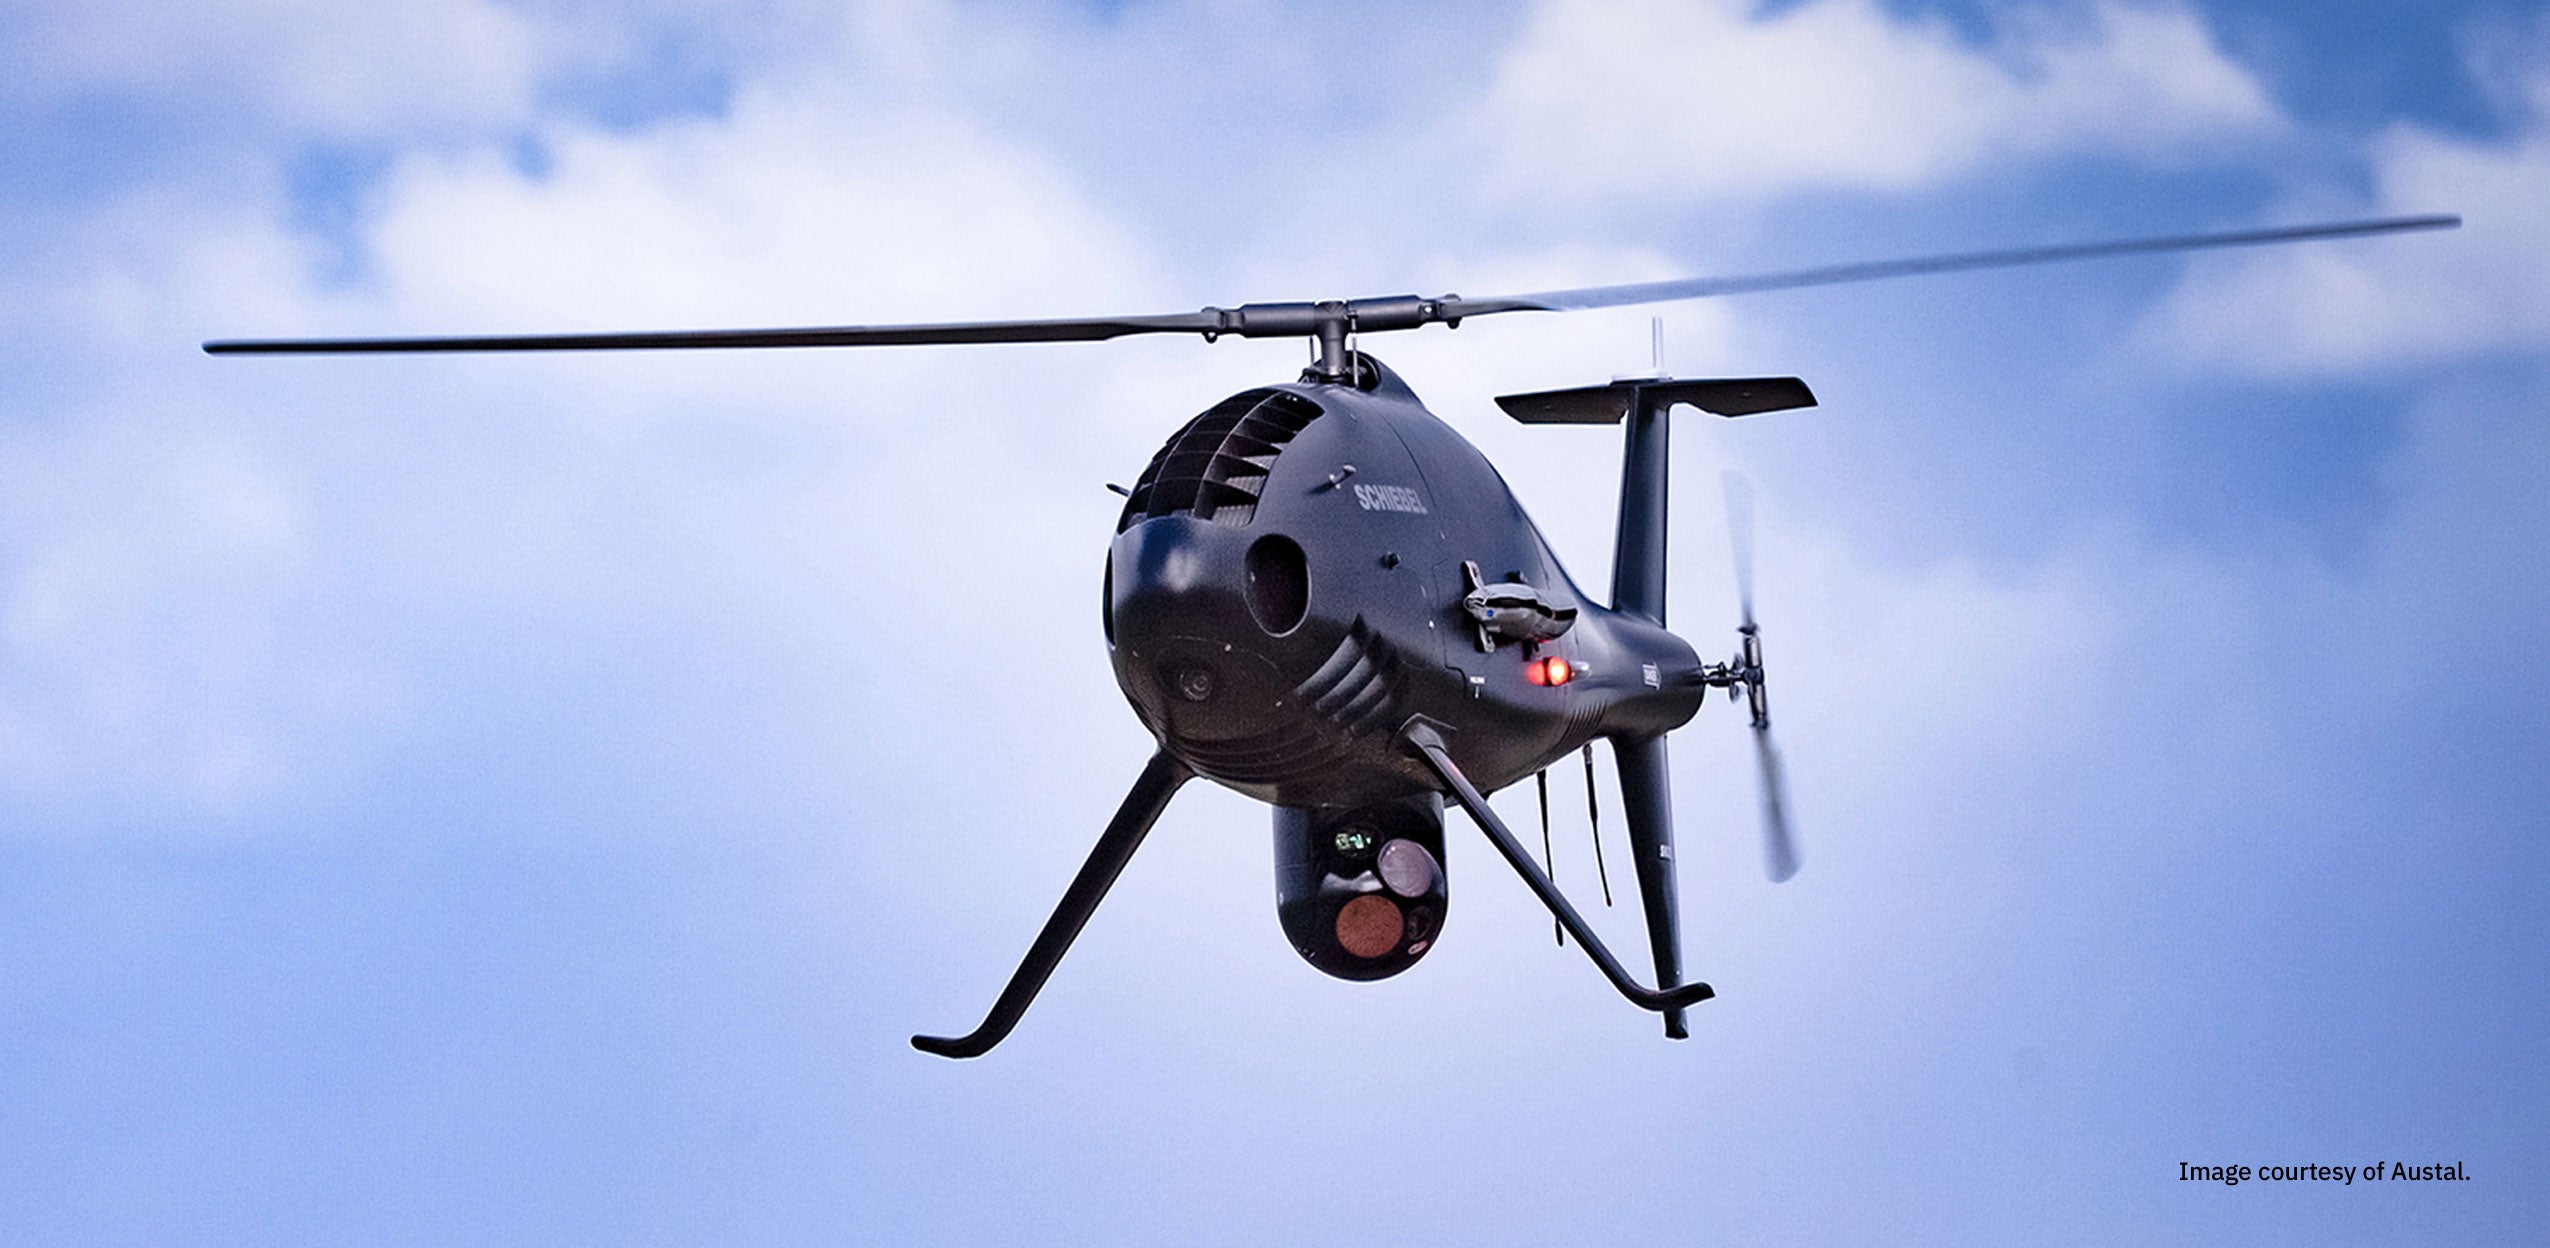 The CAMCOPTER® S-100